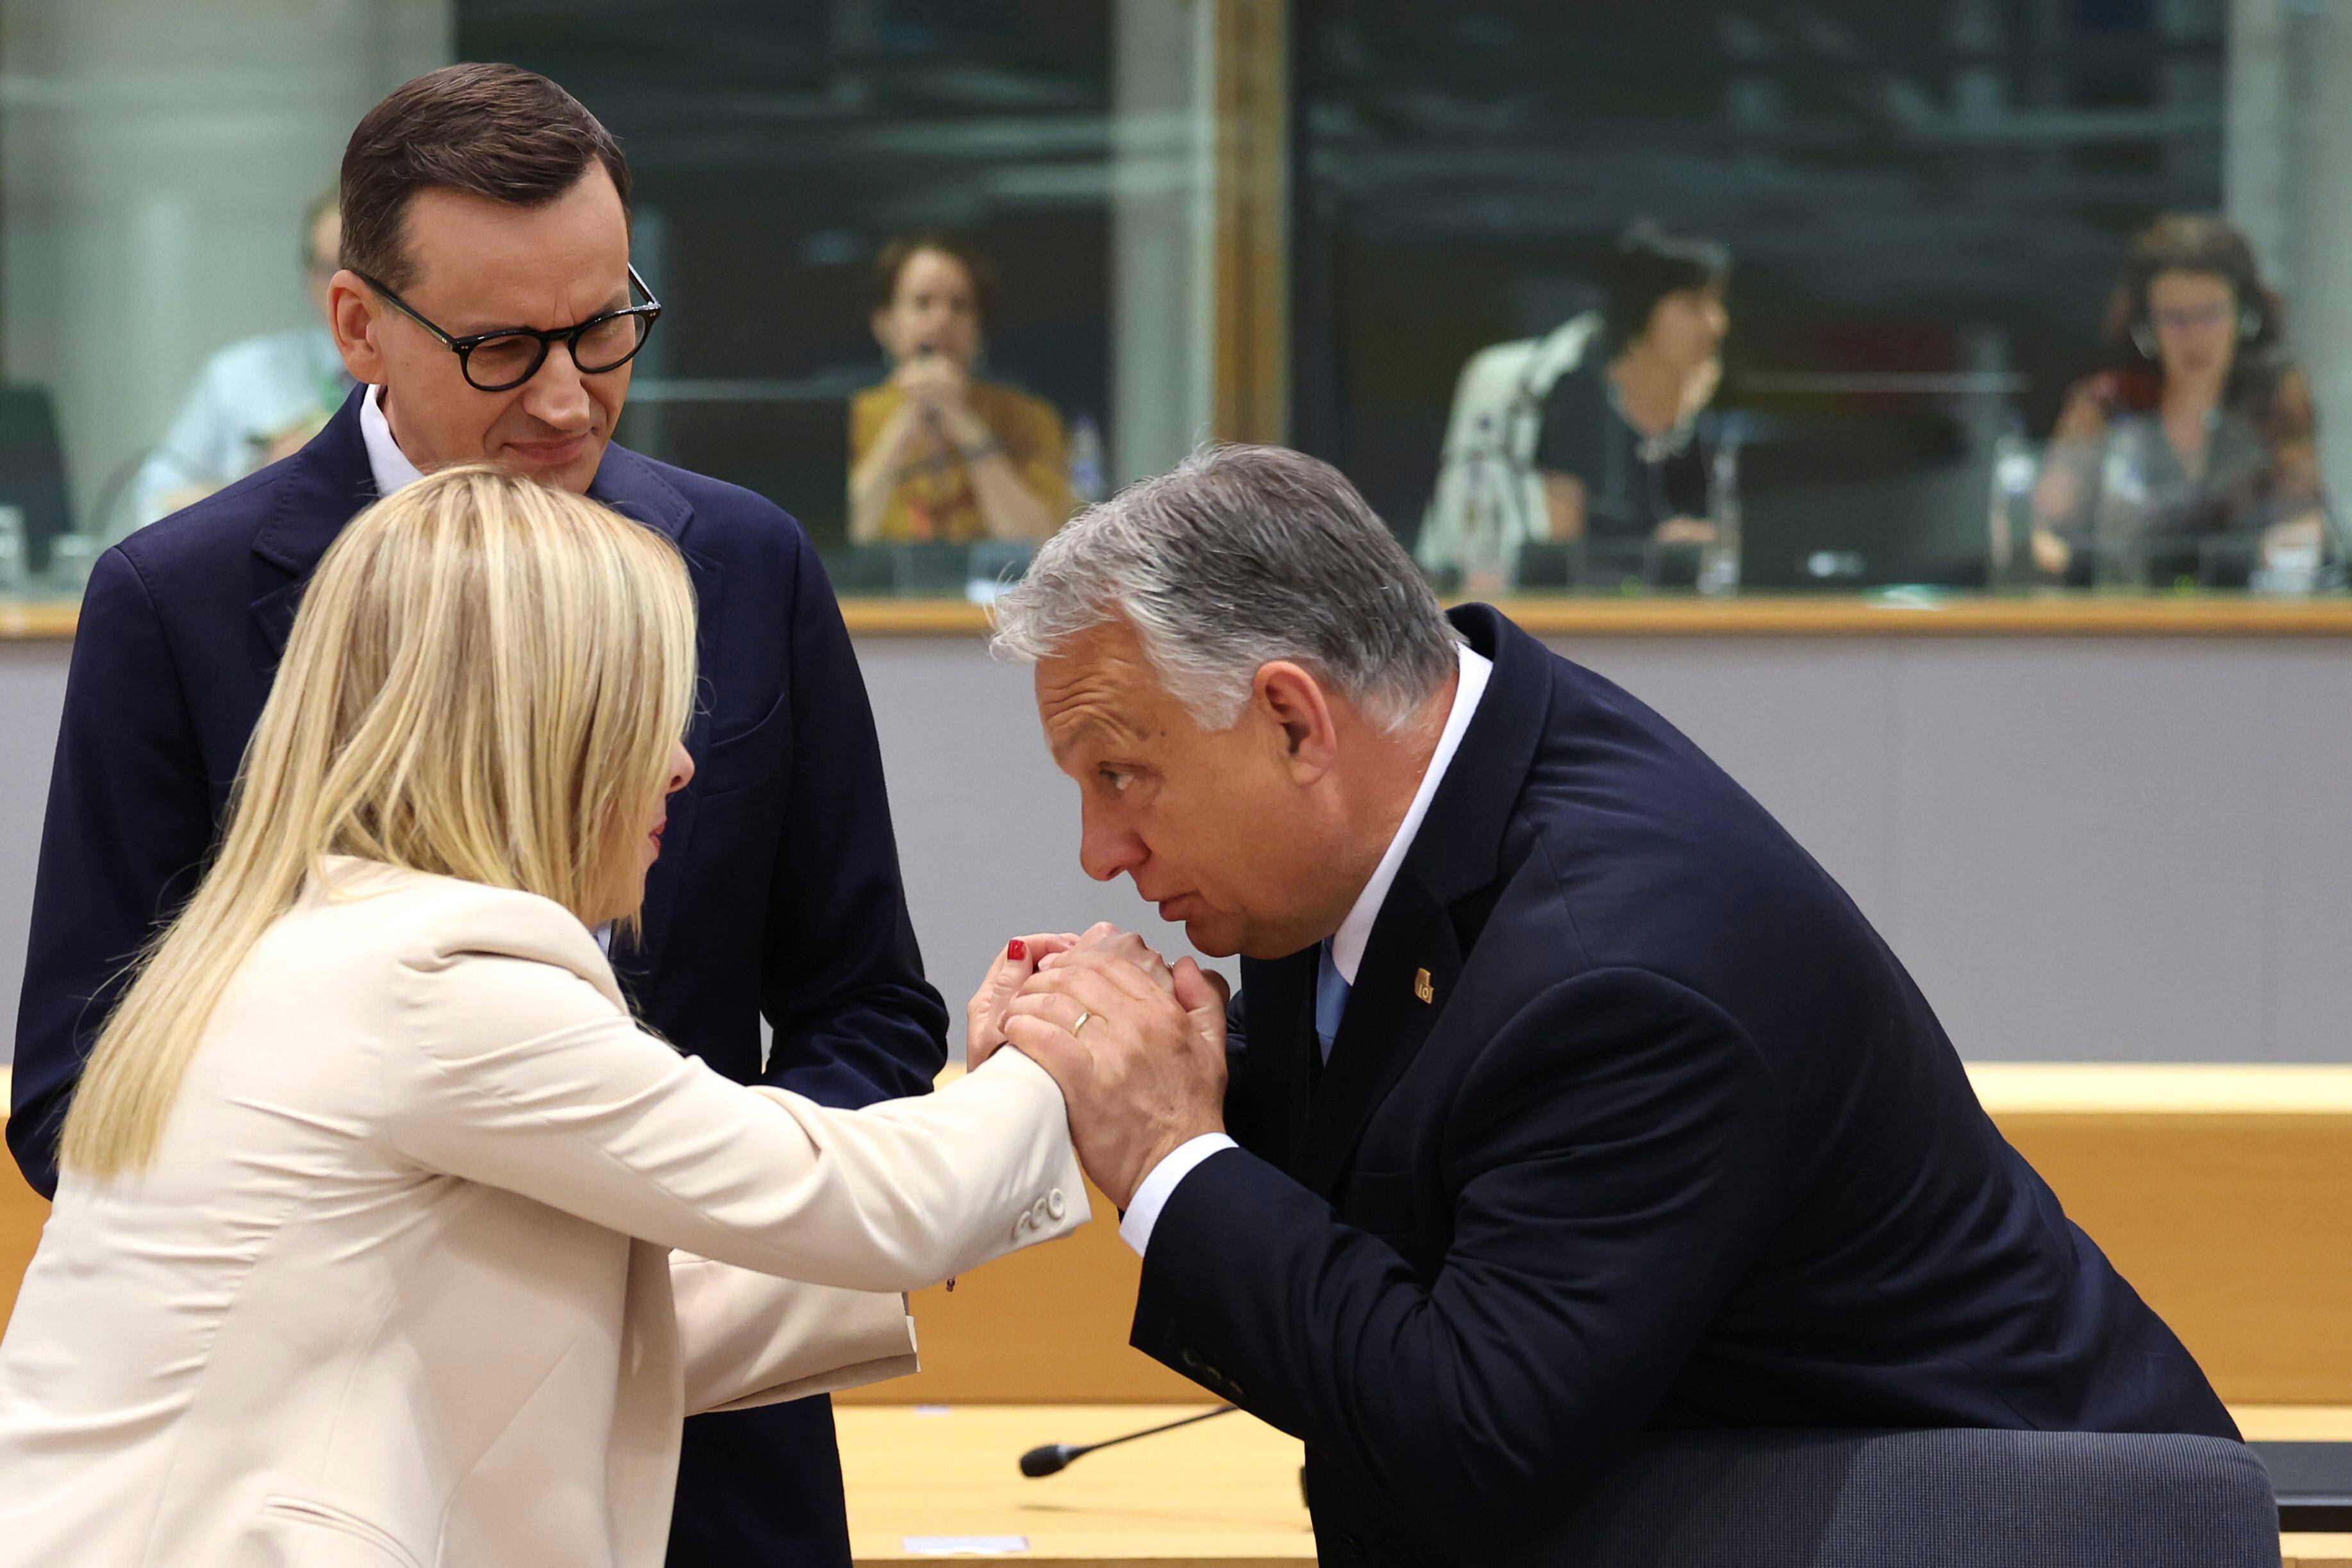 Angered over EU migrant rules, Poland and Hungary veto a summit statement  in a gesture of protest